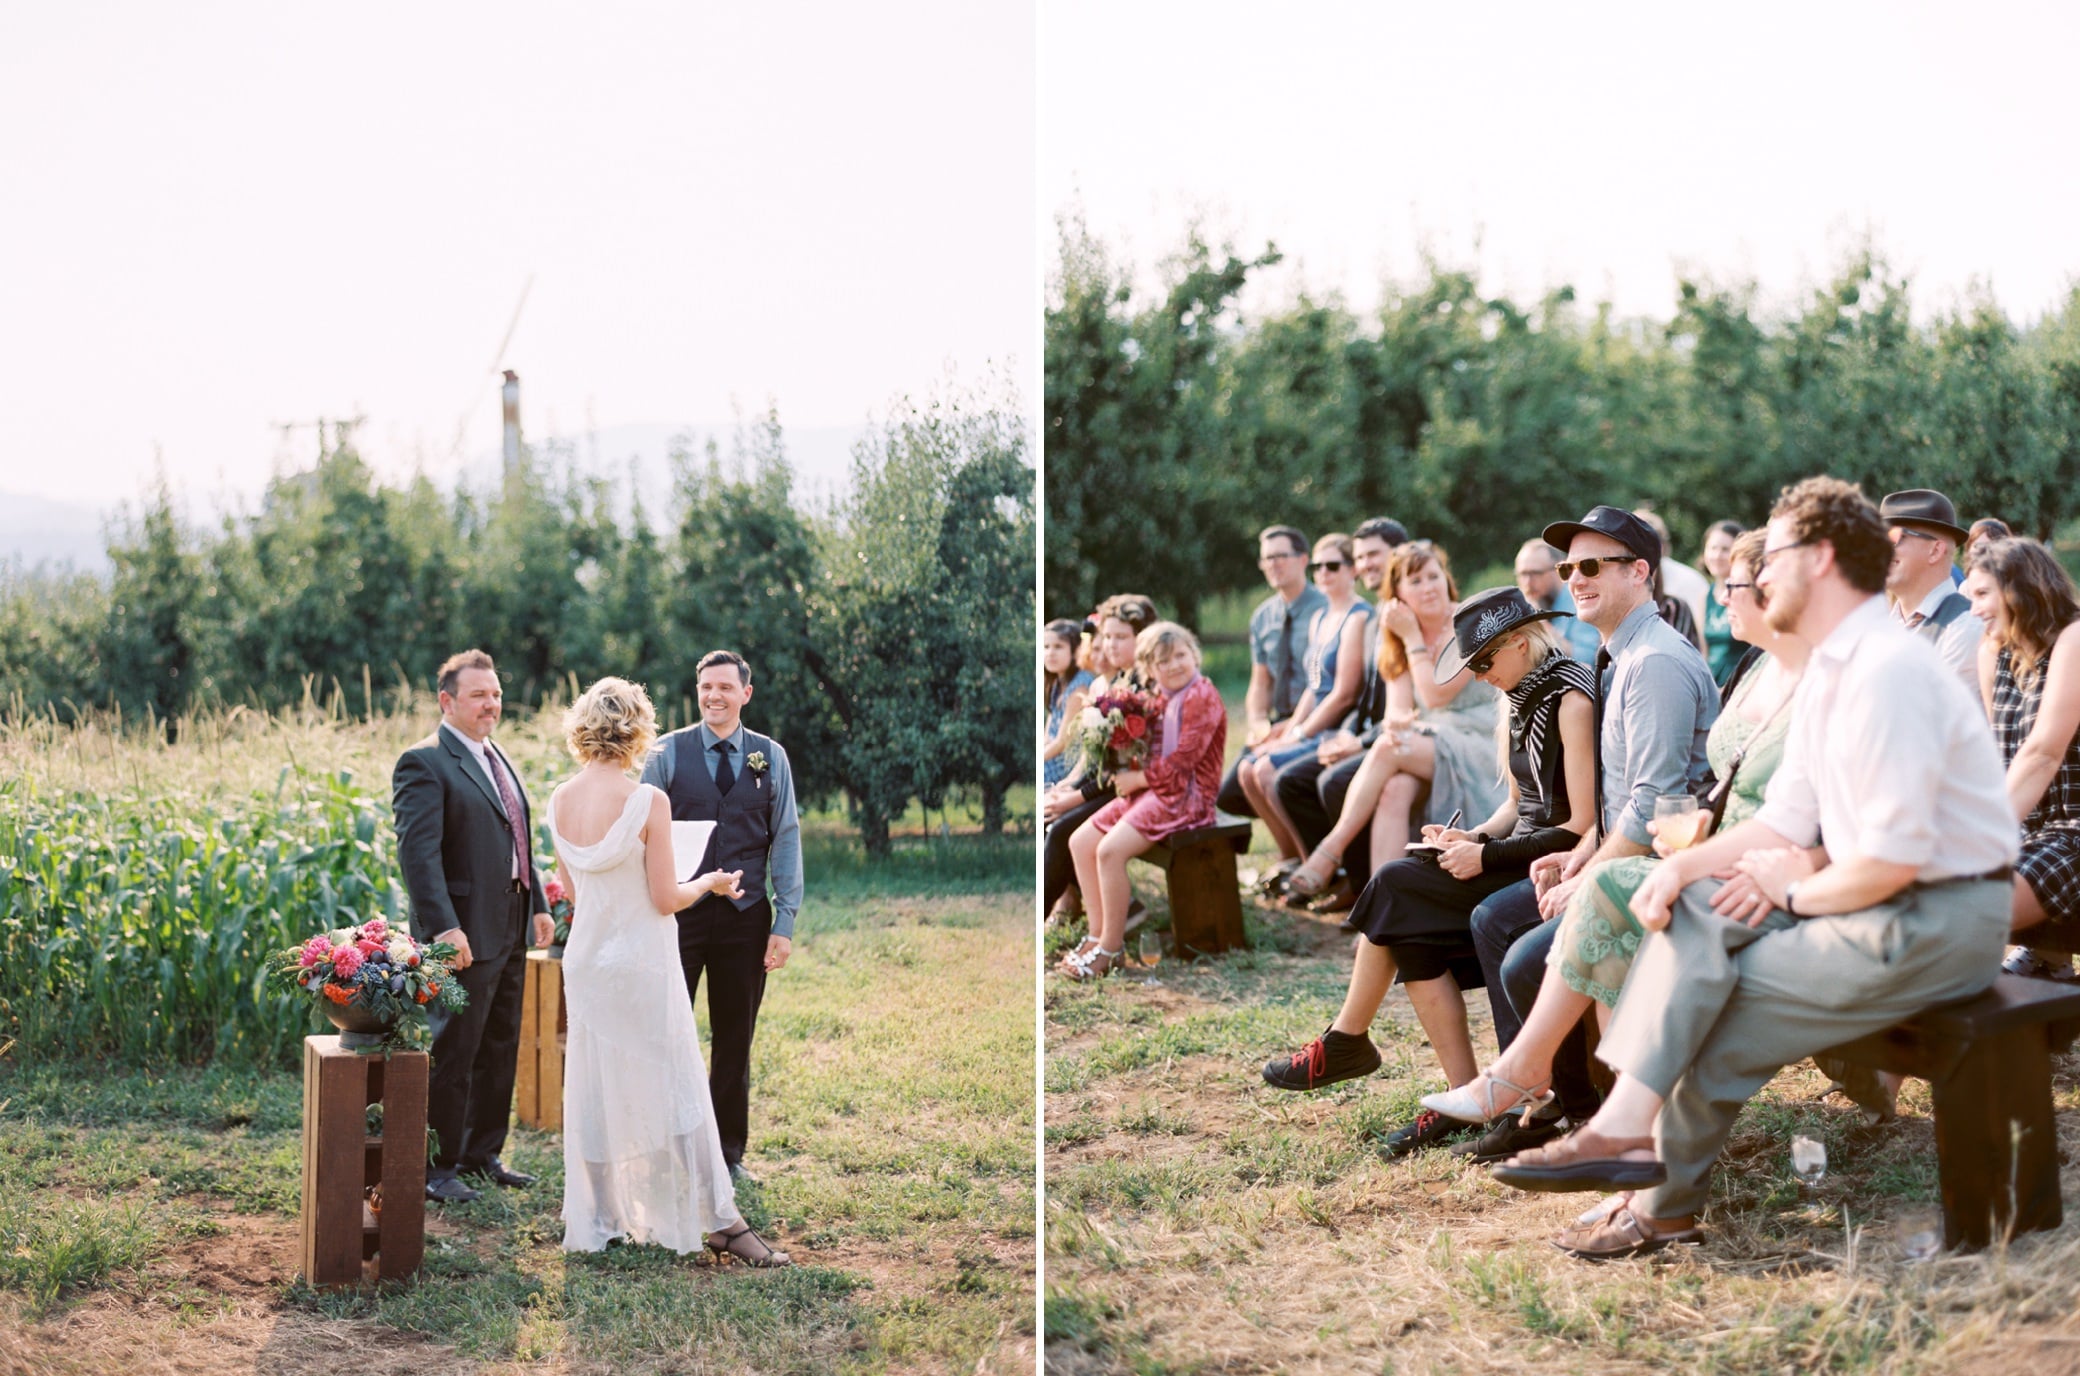 Mt. View Orchards wedding, Simply Splendid, orchard wedding